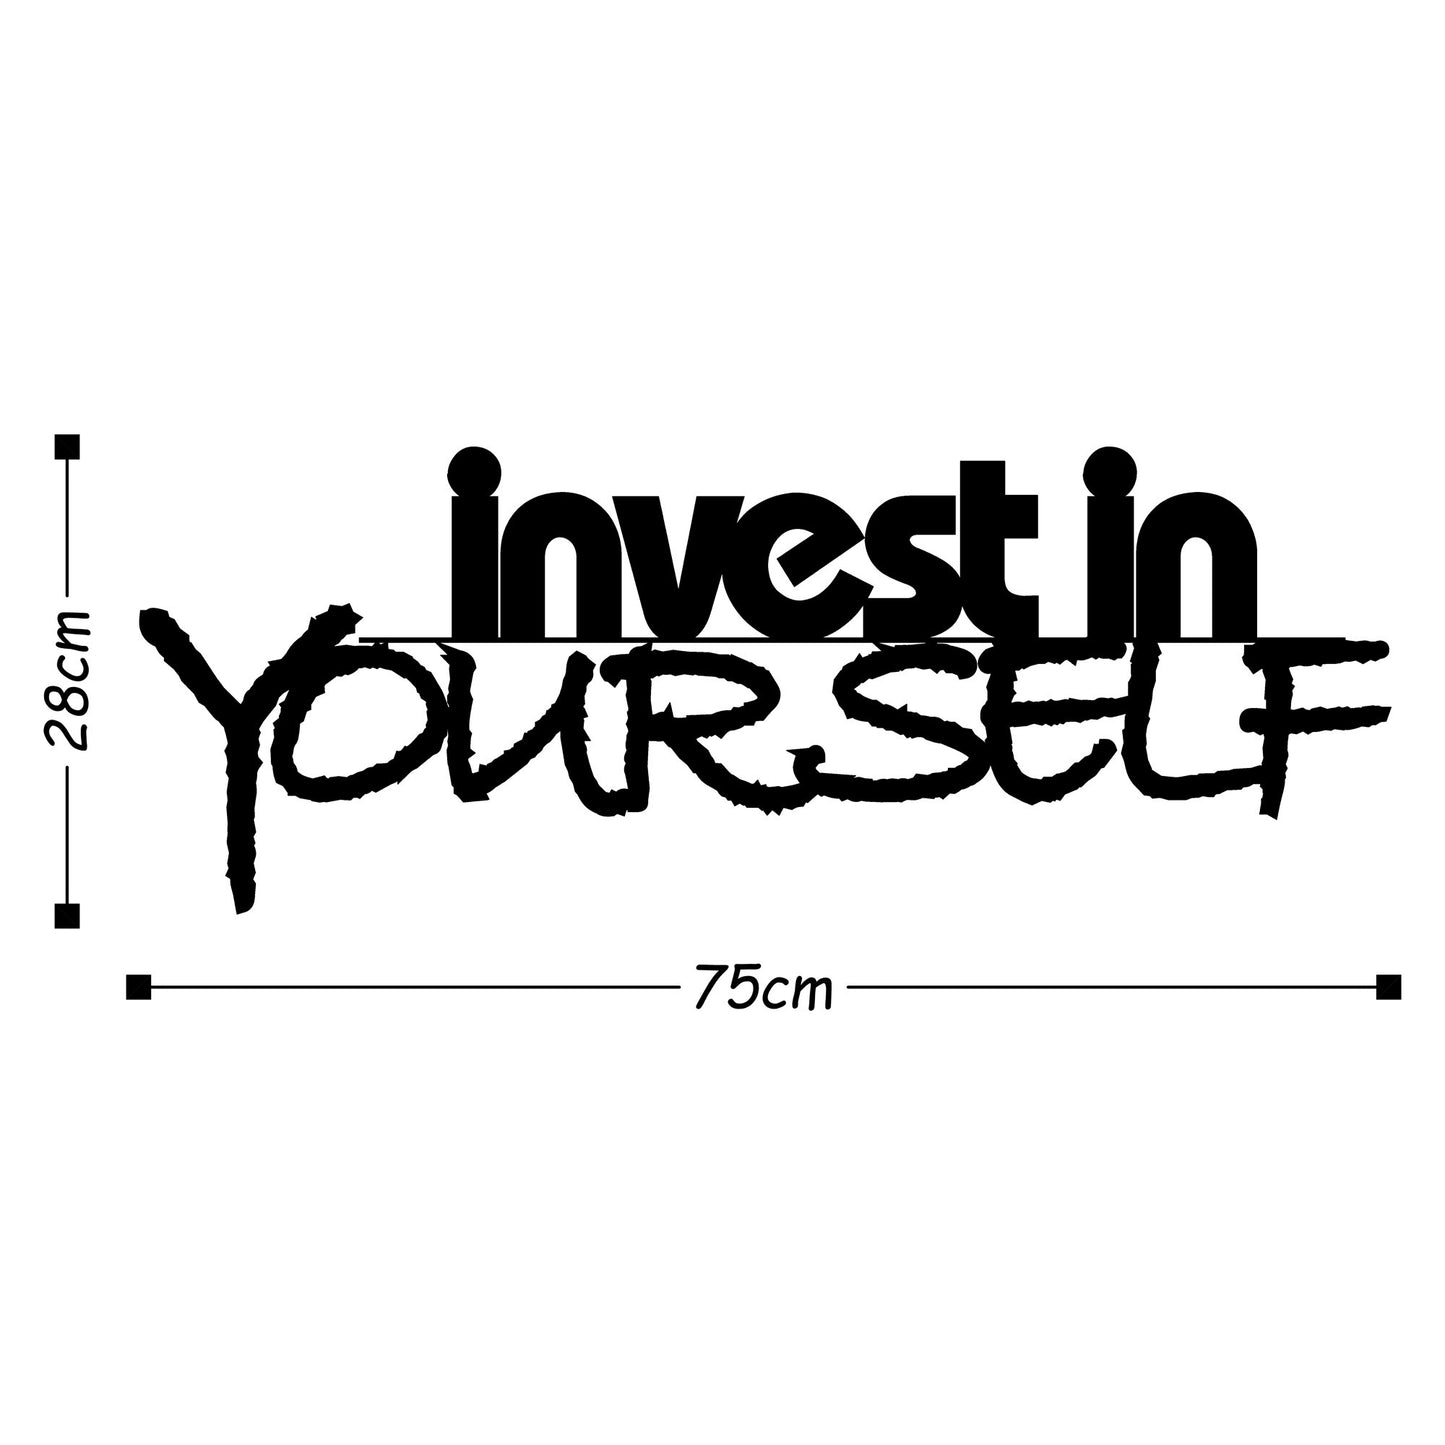 TAKK Invest In Yourself - NordlyHome.dk